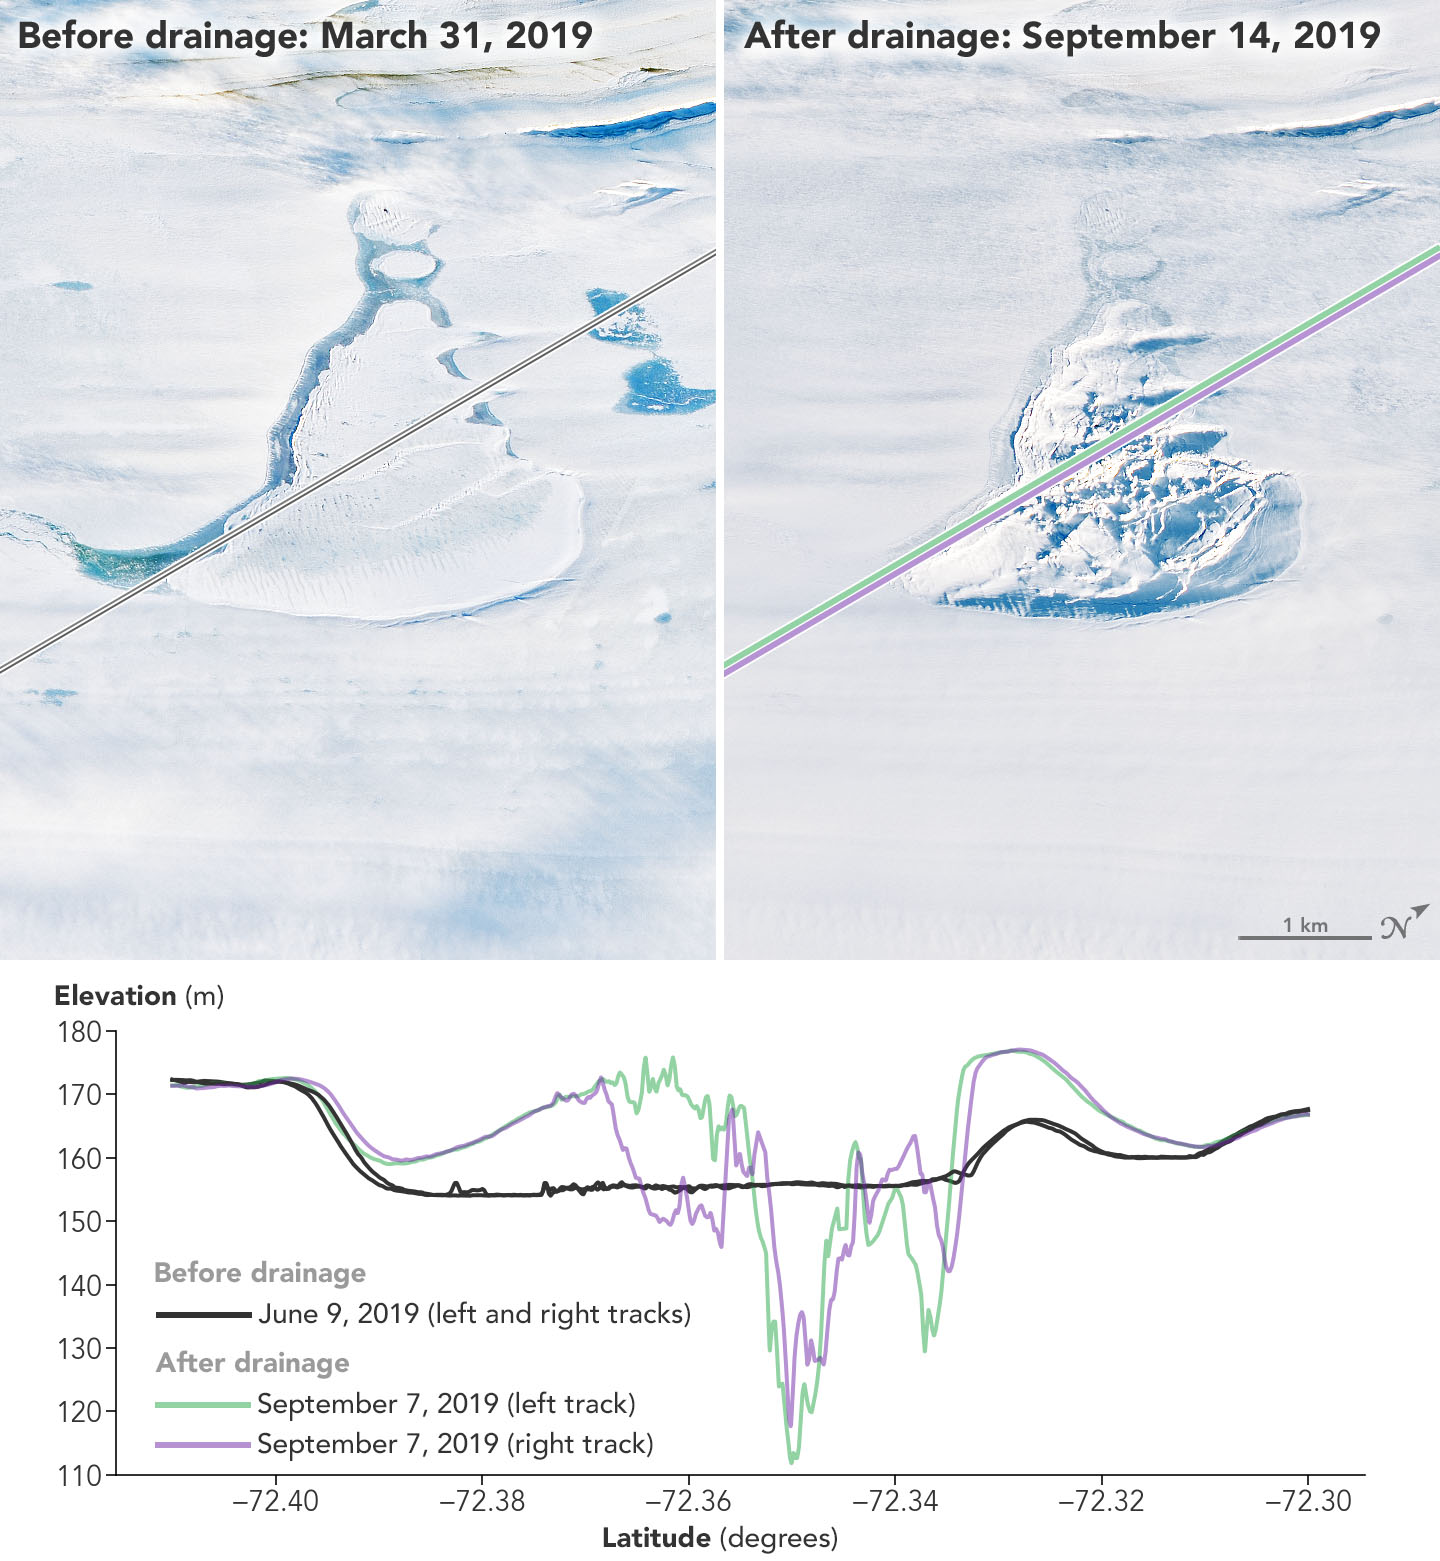 Side by side images of the same ice. Cracks show an outline on the surface that indicates a subglacial lake. In the March 2019 image the ice is smooth. In the September 2019 image the ice is chunky. 